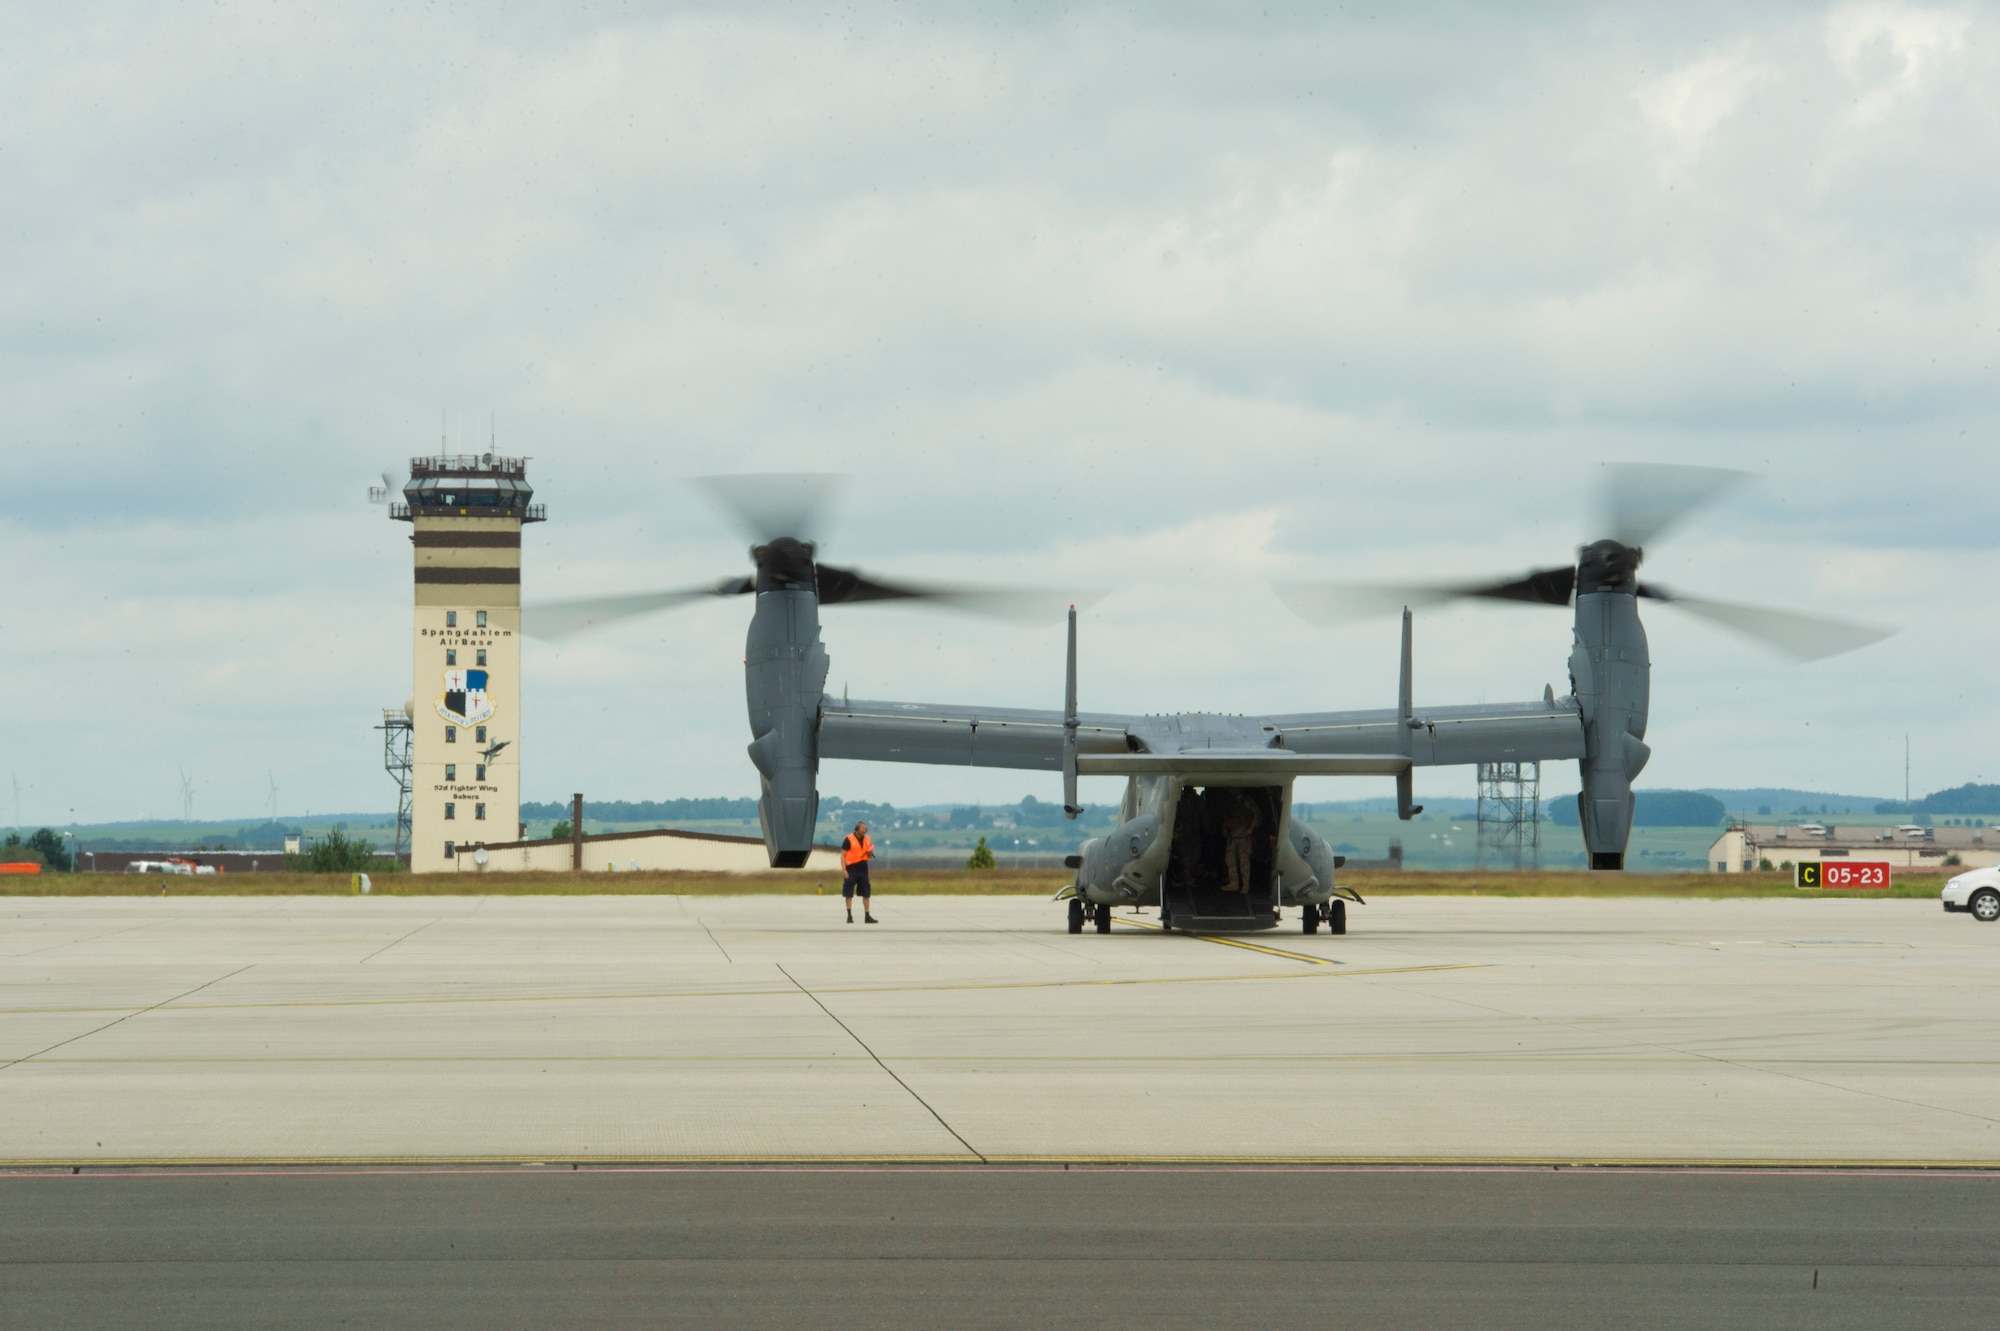 A CV-22 Osprey tilt-rotor aircraft assigned to the 352nd Special Operations Wing lands on the flightline at Spangdahlem Air Base, Germany, June 28, 2016. The 352nd SOW, currently stationed at Royal Air Force Mildenhall, United Kingdom, will relocate to Spangdahlem as part of the European Infrastructure Consolidation realignment slated over the coming years. (U.S. Air Force Photo by Staff Sgt. Joe W. McFadden/Released)